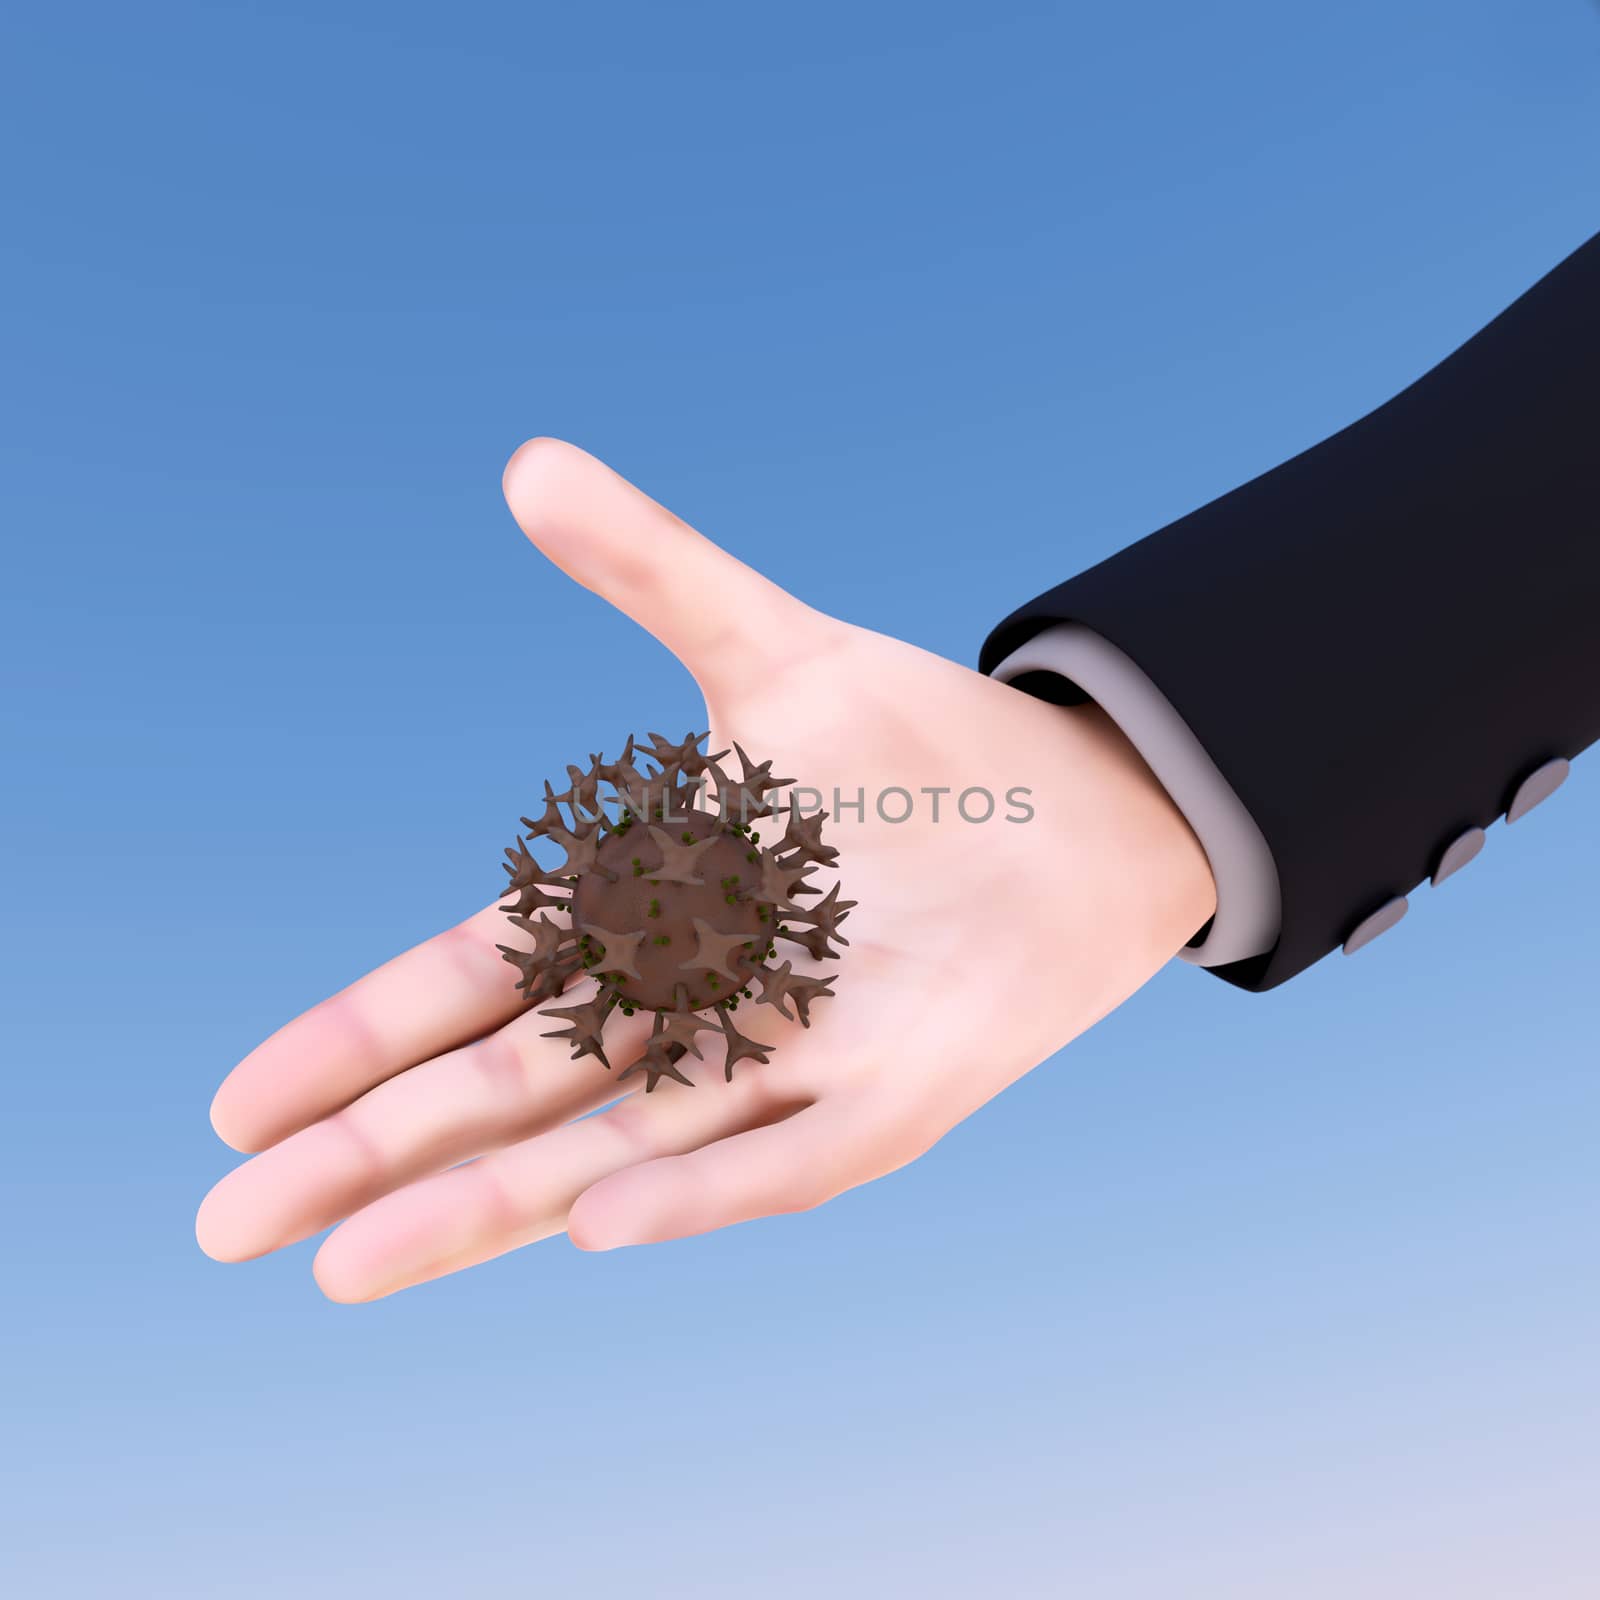 Virus in the hand- Health concept. 3D illustration. Sky background.